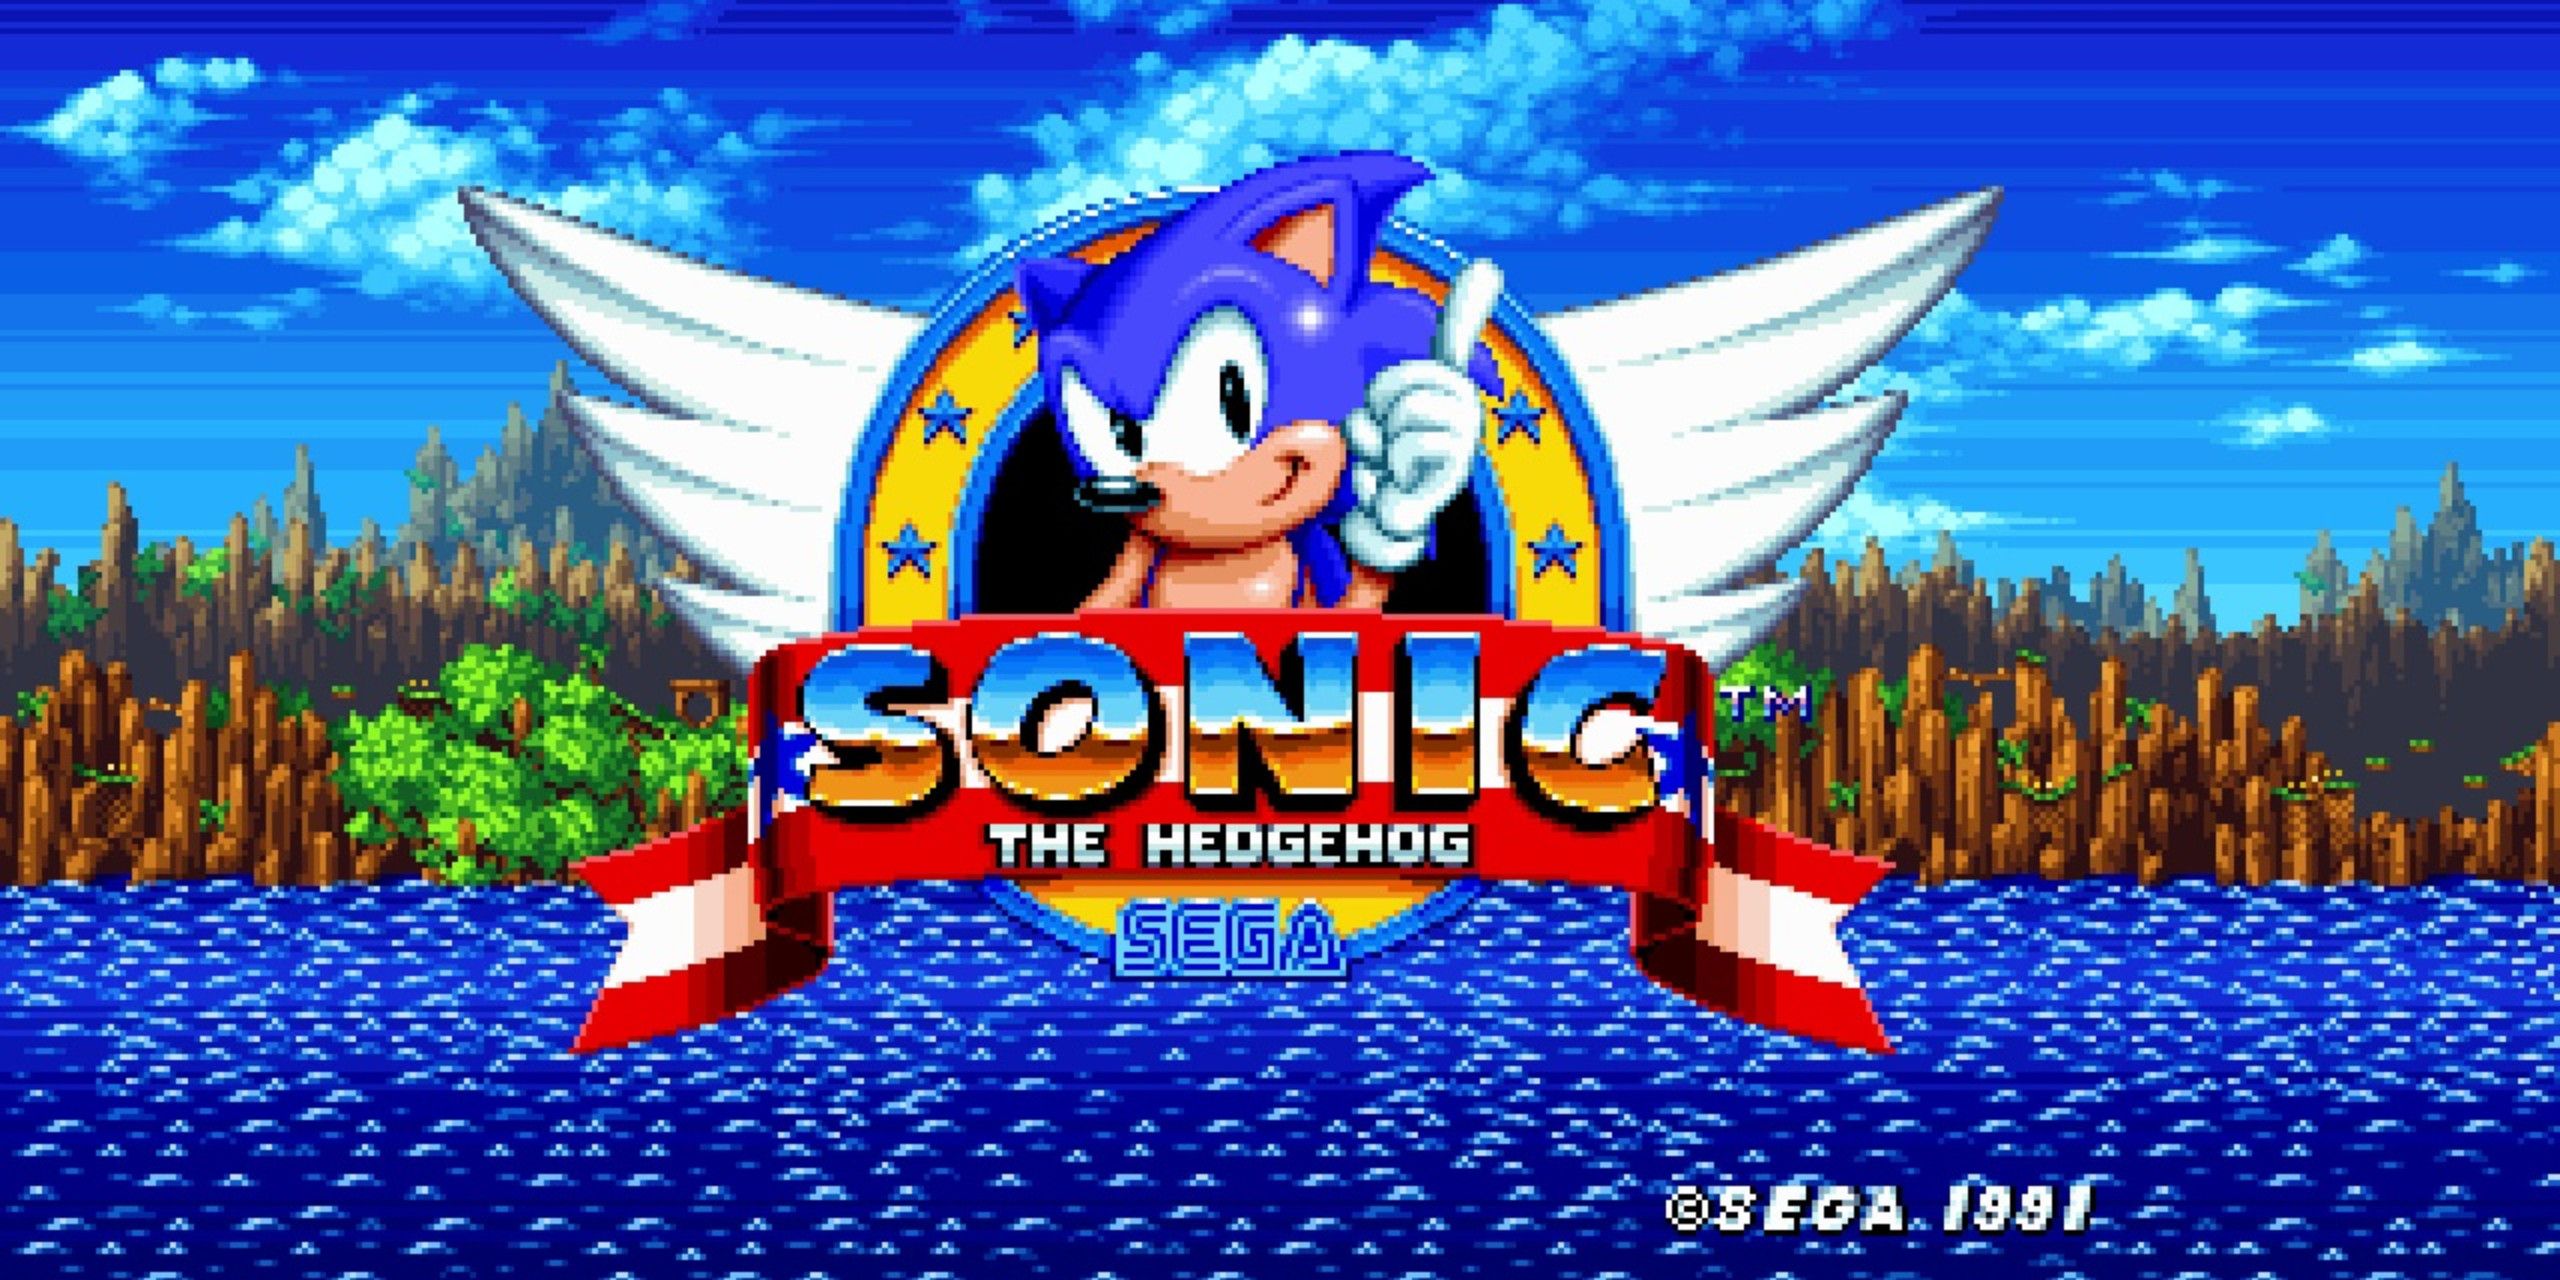 The opening screen for the first Sonic game